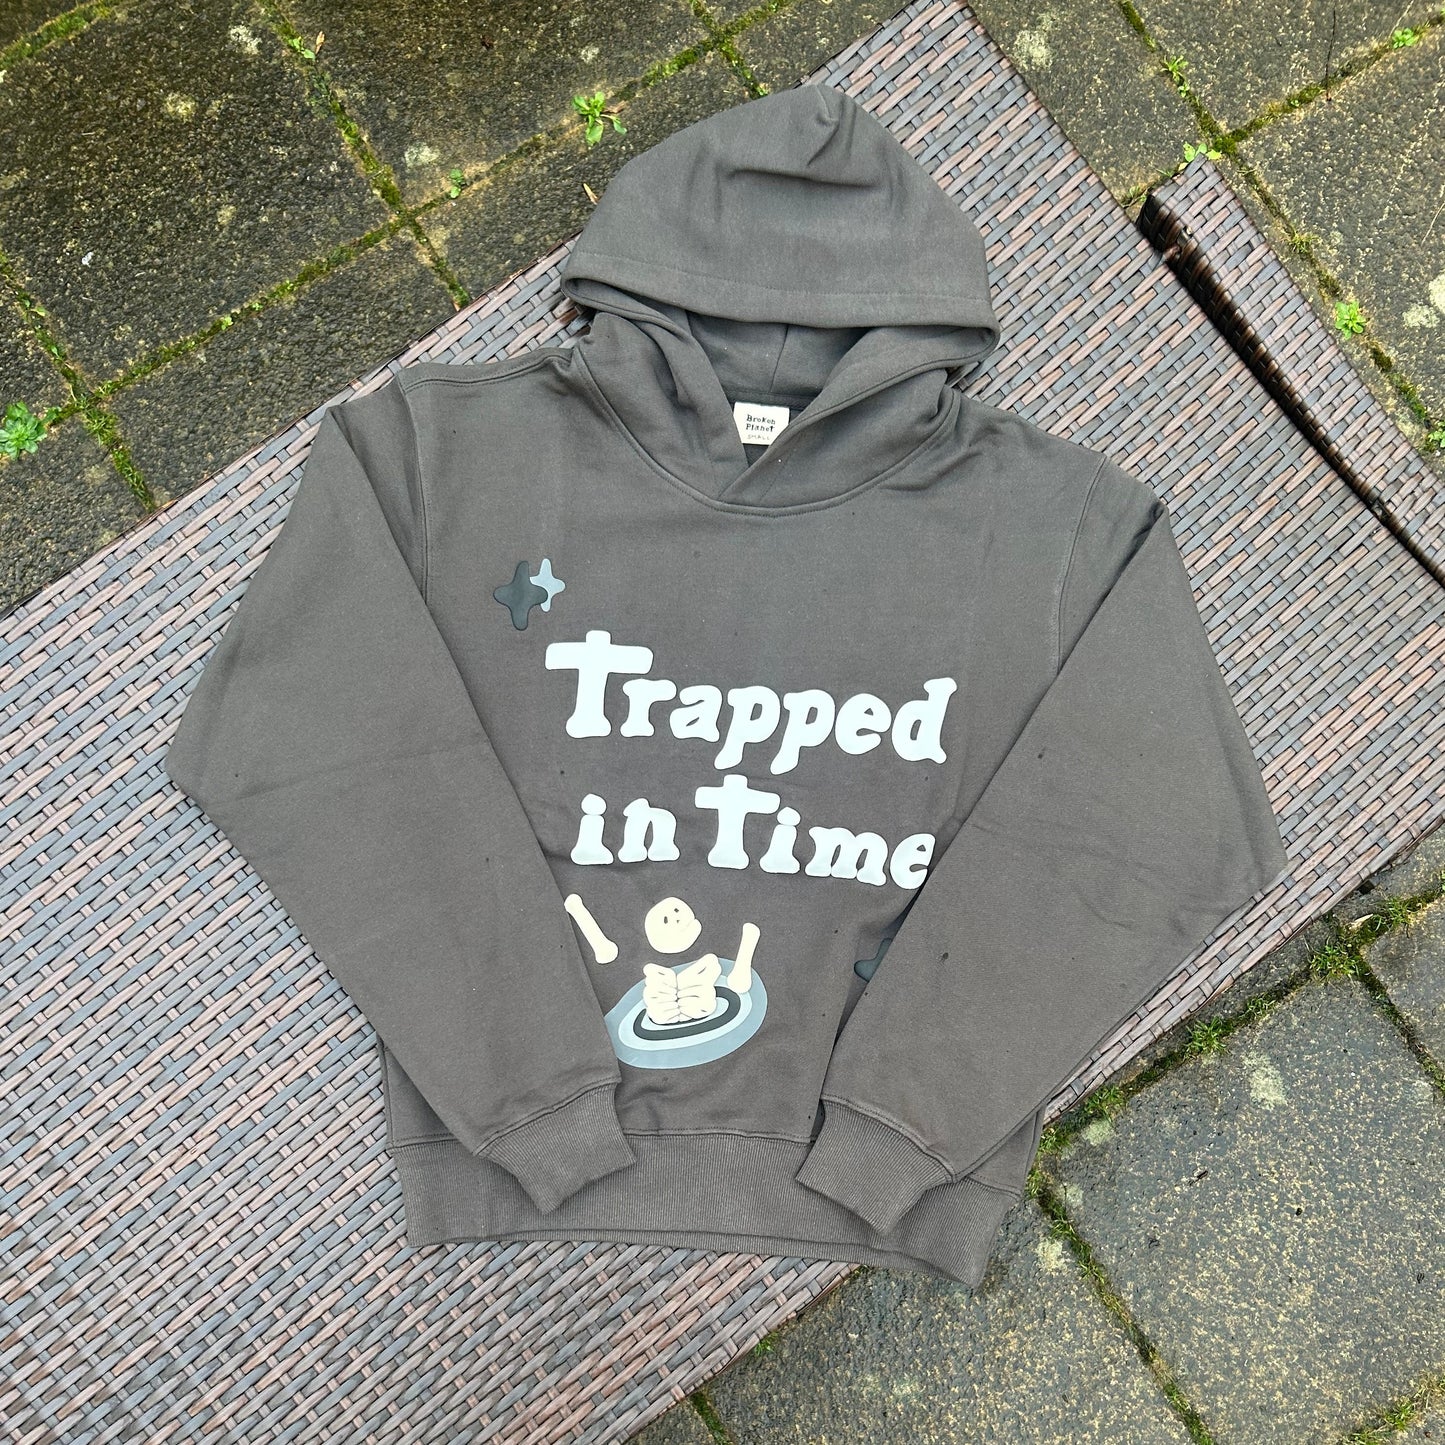 Broken Planet "Trapped In Time" hoodie